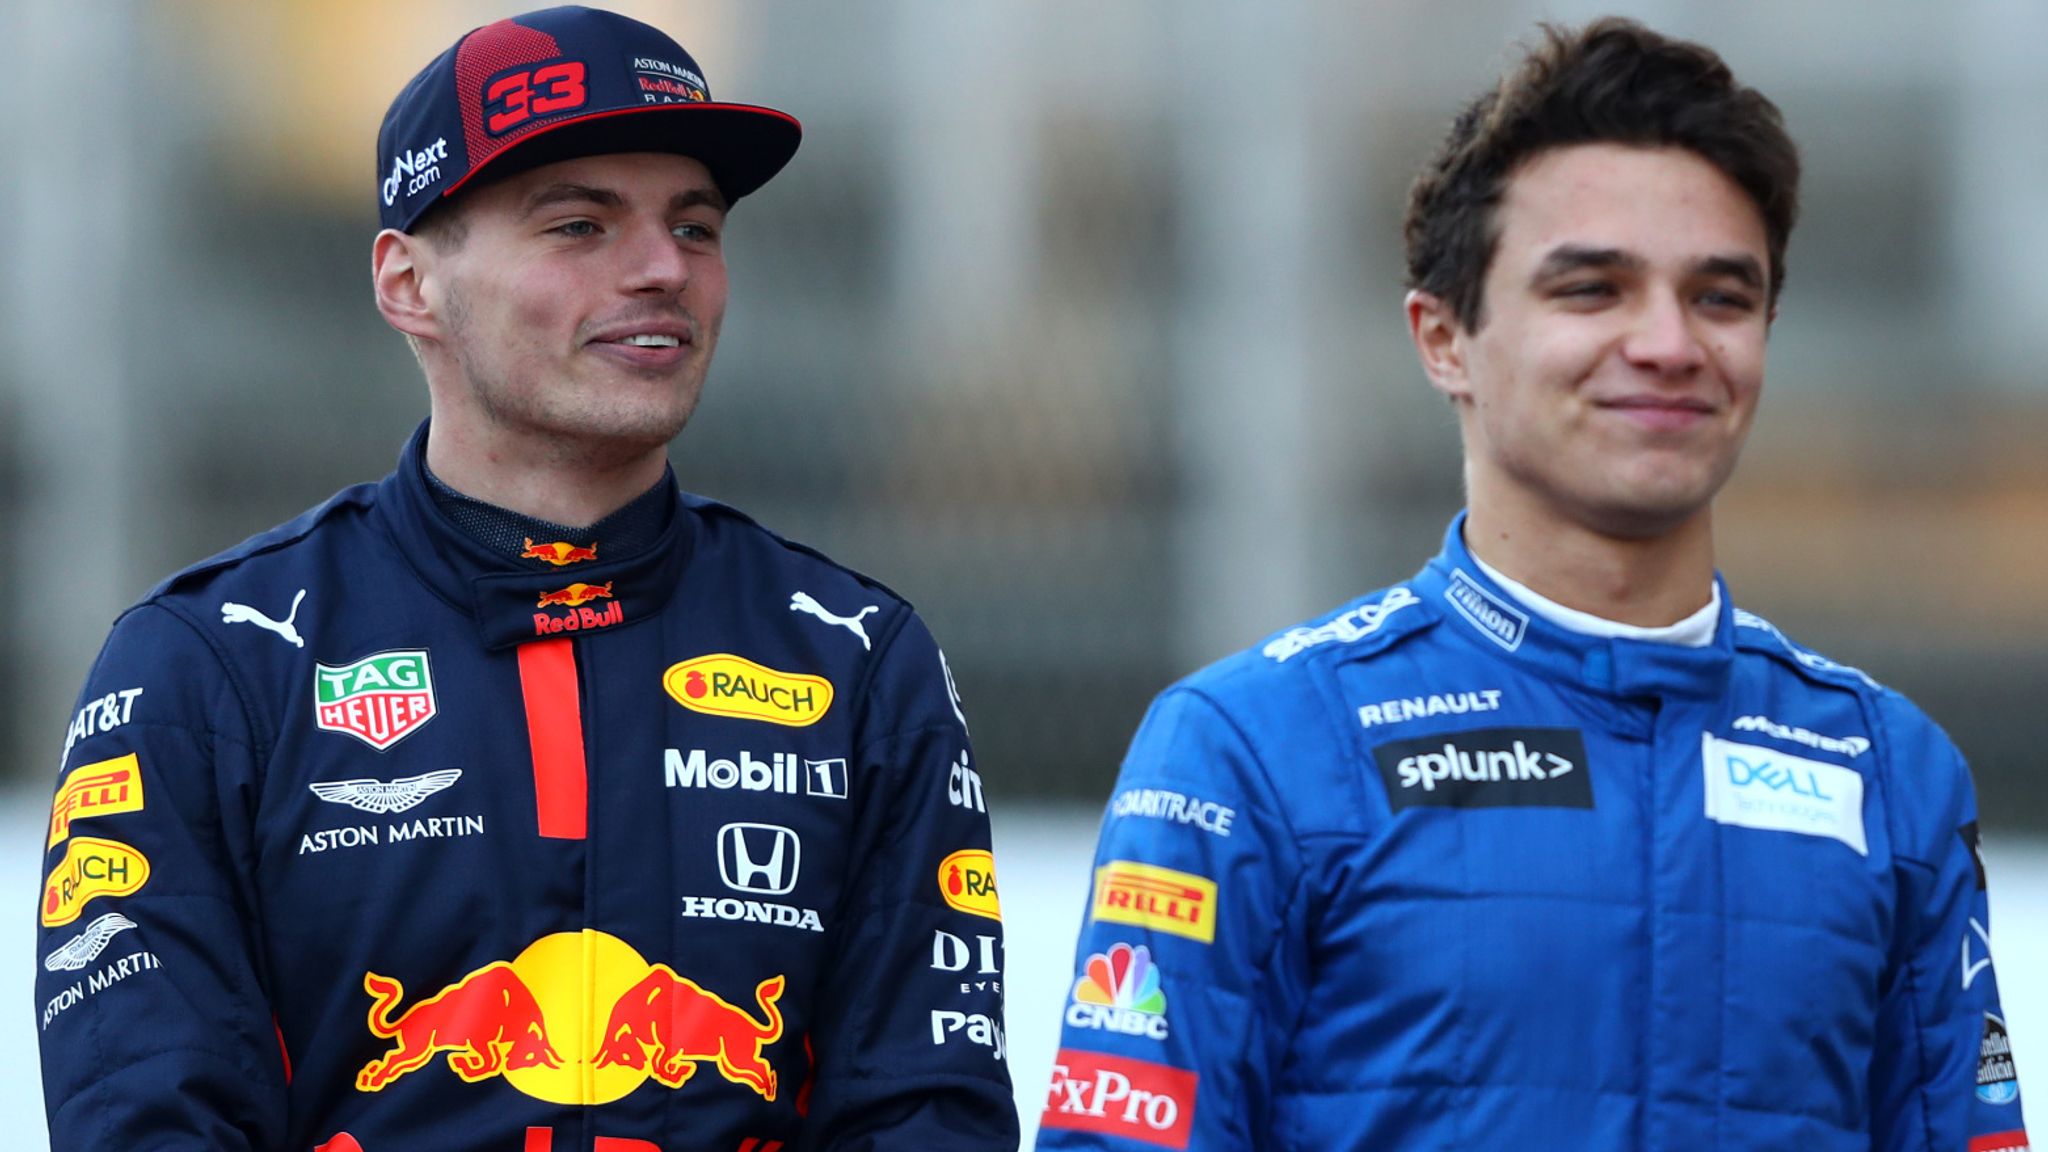 Max Verstappen and Lando Norris race online to make up for lack of F1 | F1 News